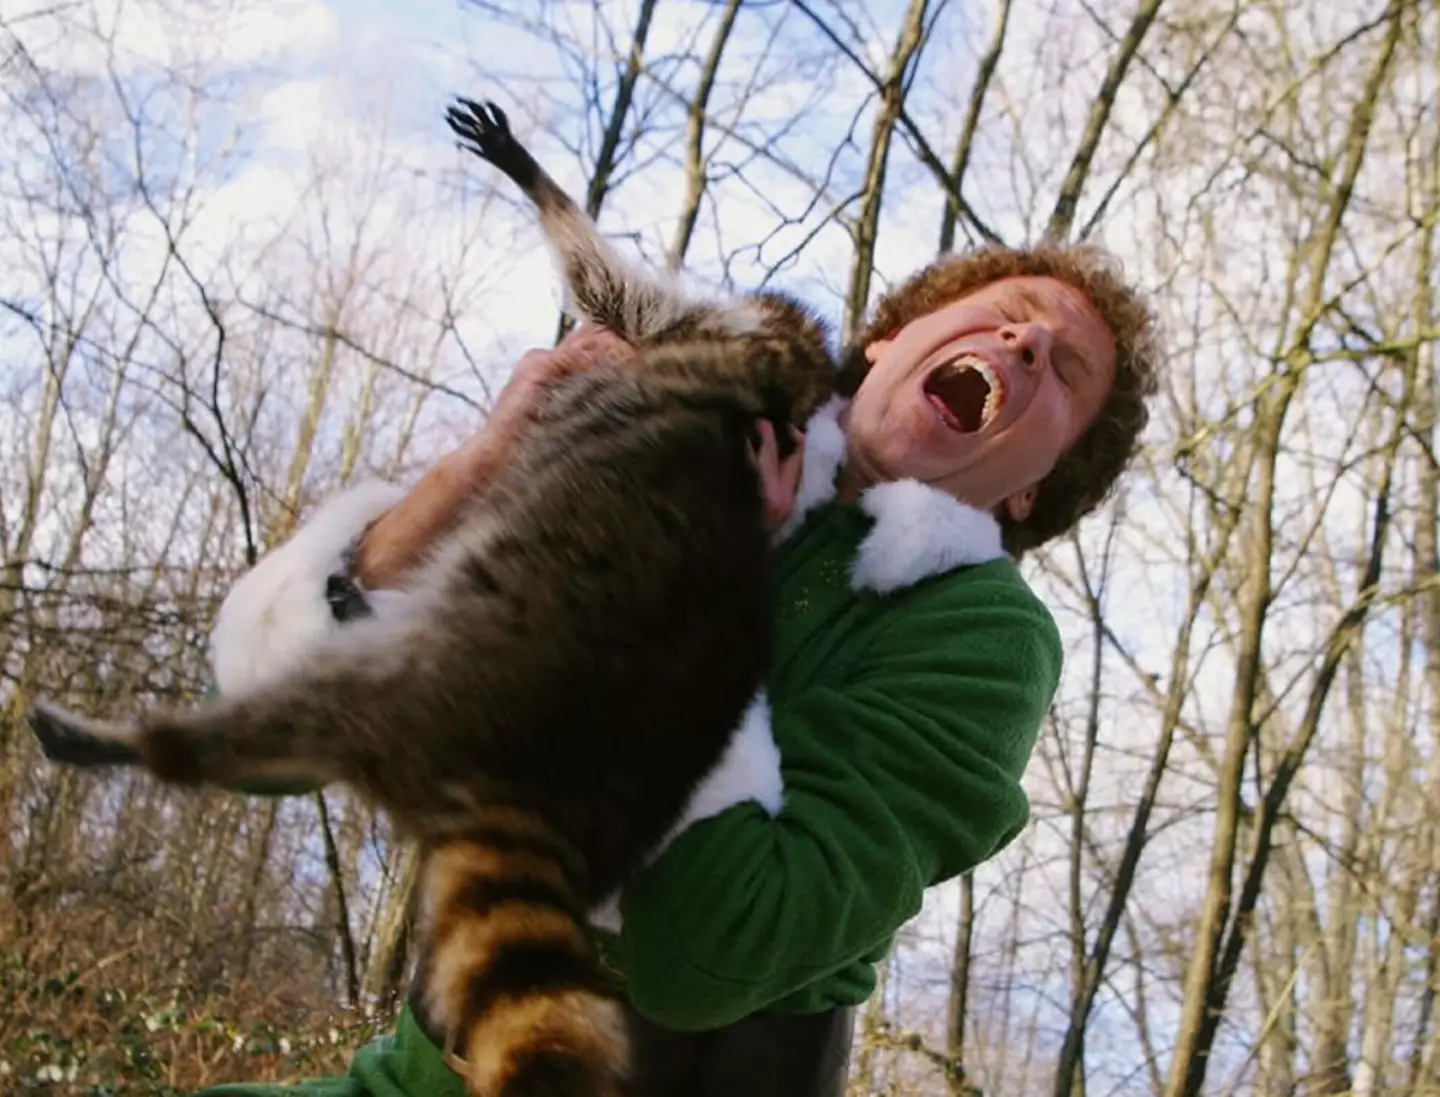 In this image, Buddy is you and the racoon is the new 'thriller' trailer for the movie.